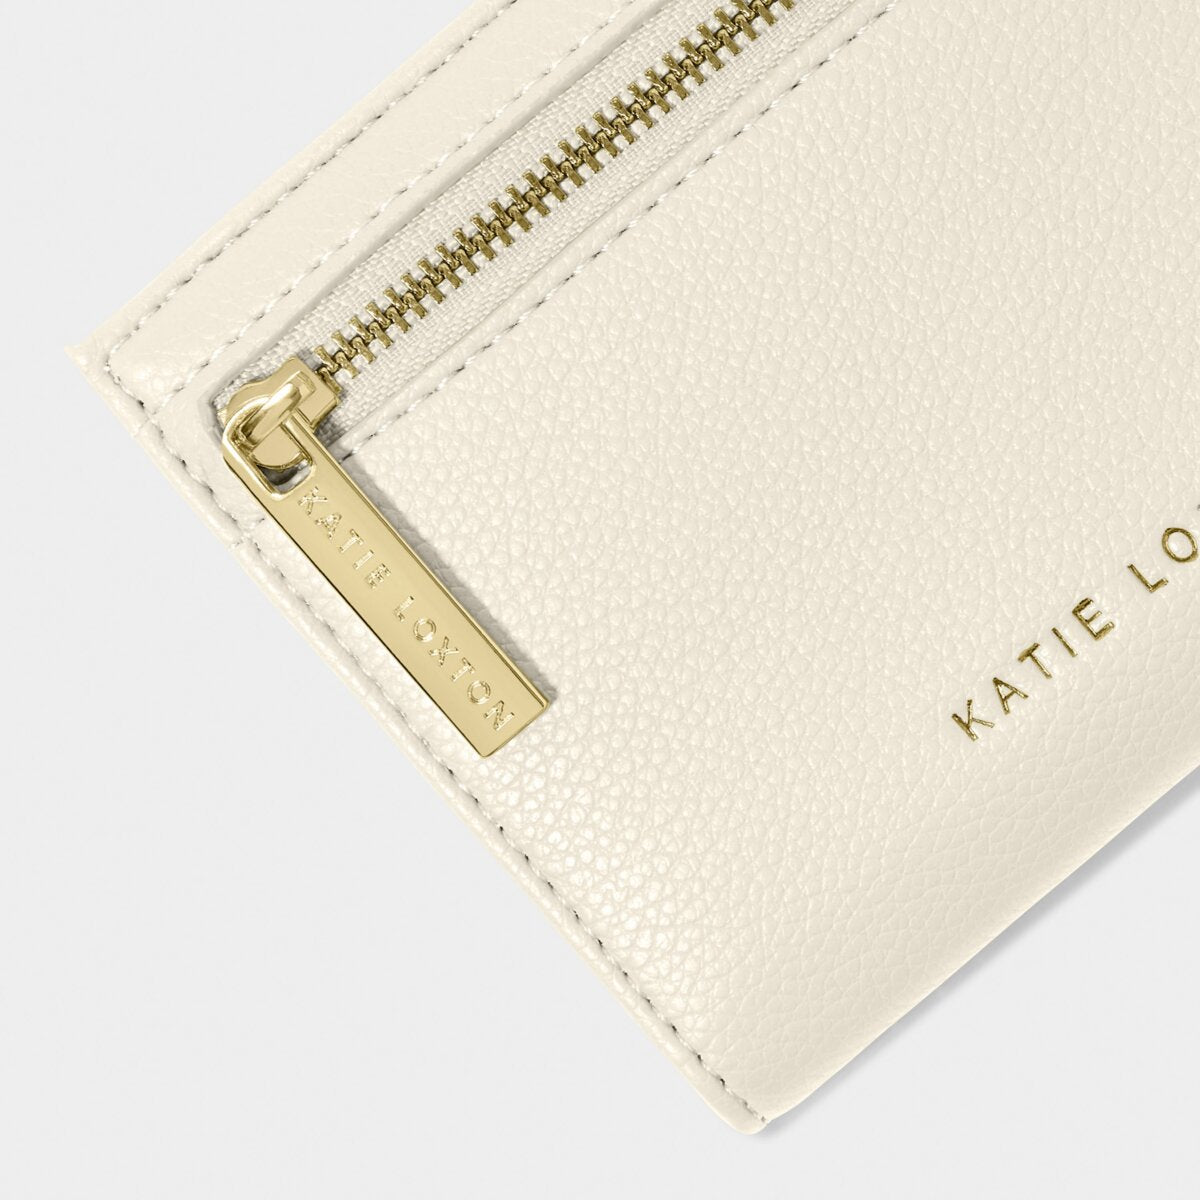 close up of purse, highlighting the katie Loxton gold zipper and gold foil Katie Loxton detaiil along bottom edge of the purse.